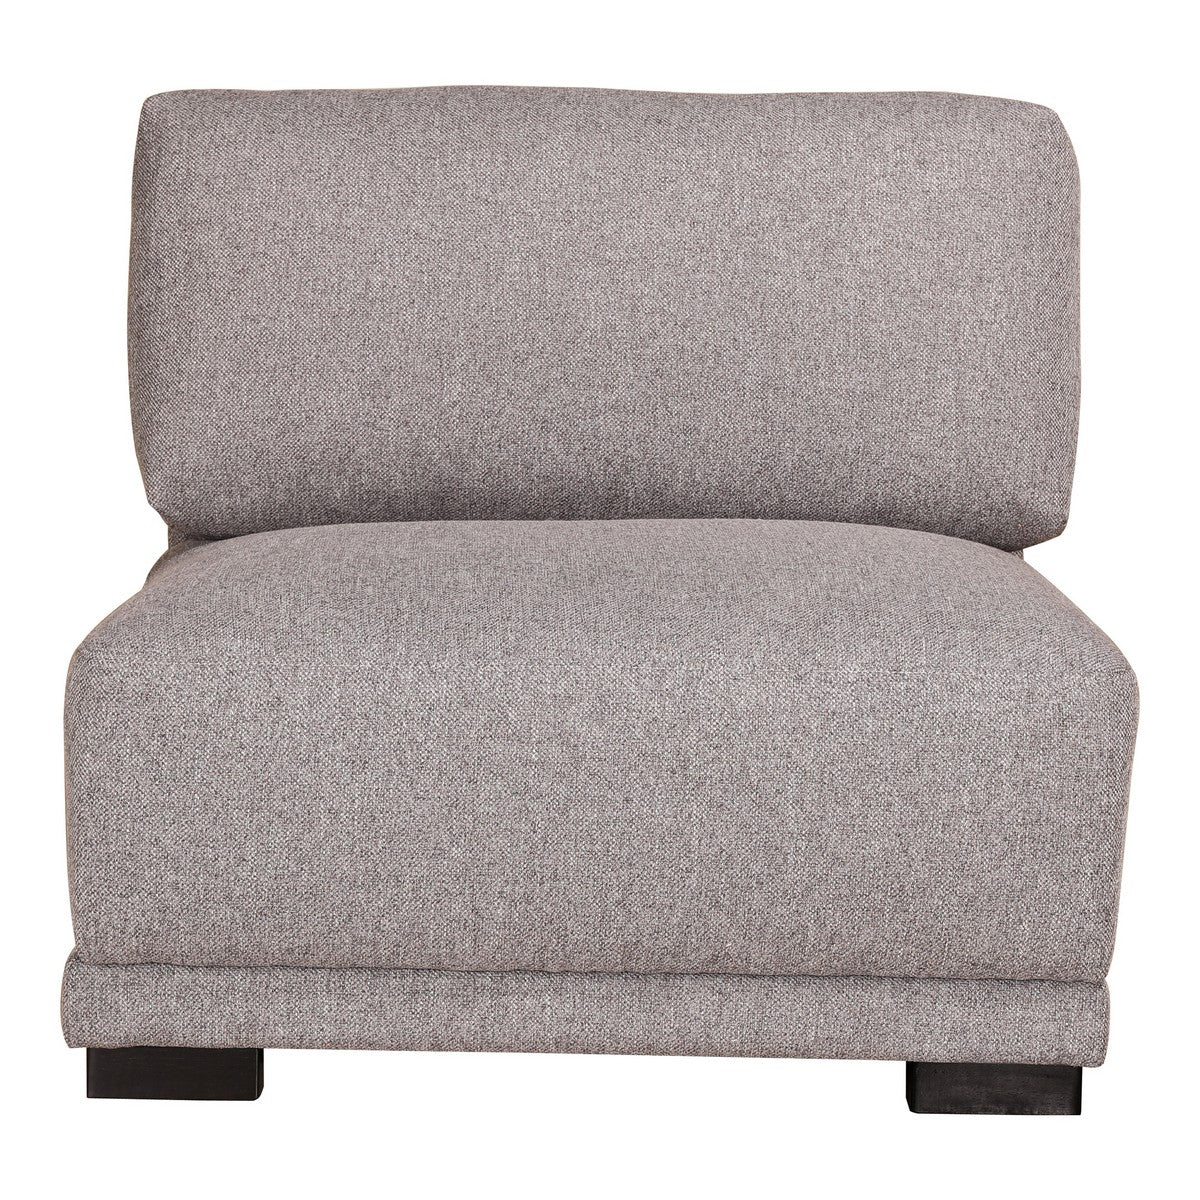 Moe's Home Collection Romeo Slipper Chair Grey - RN-1115-29